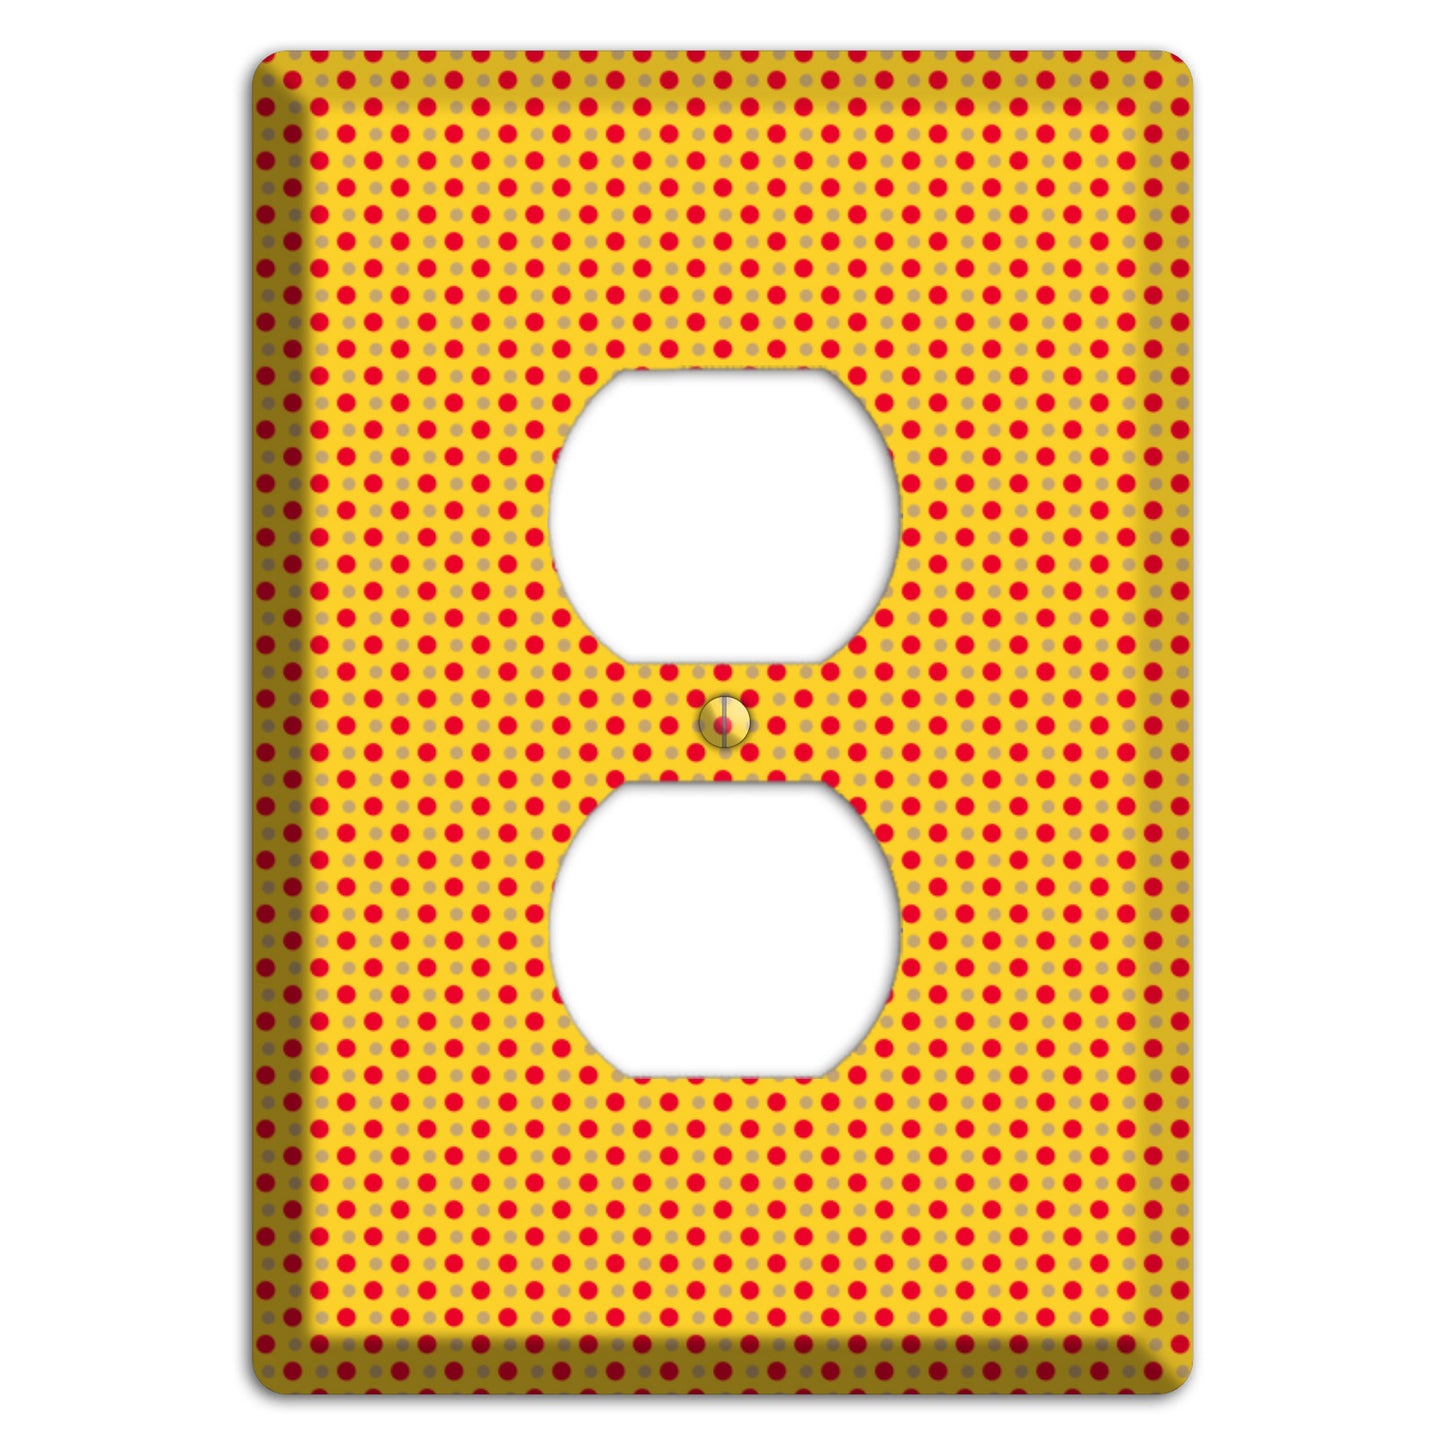 Orange with Maroon Tiny Polka Dots Duplex Outlet Wallplate